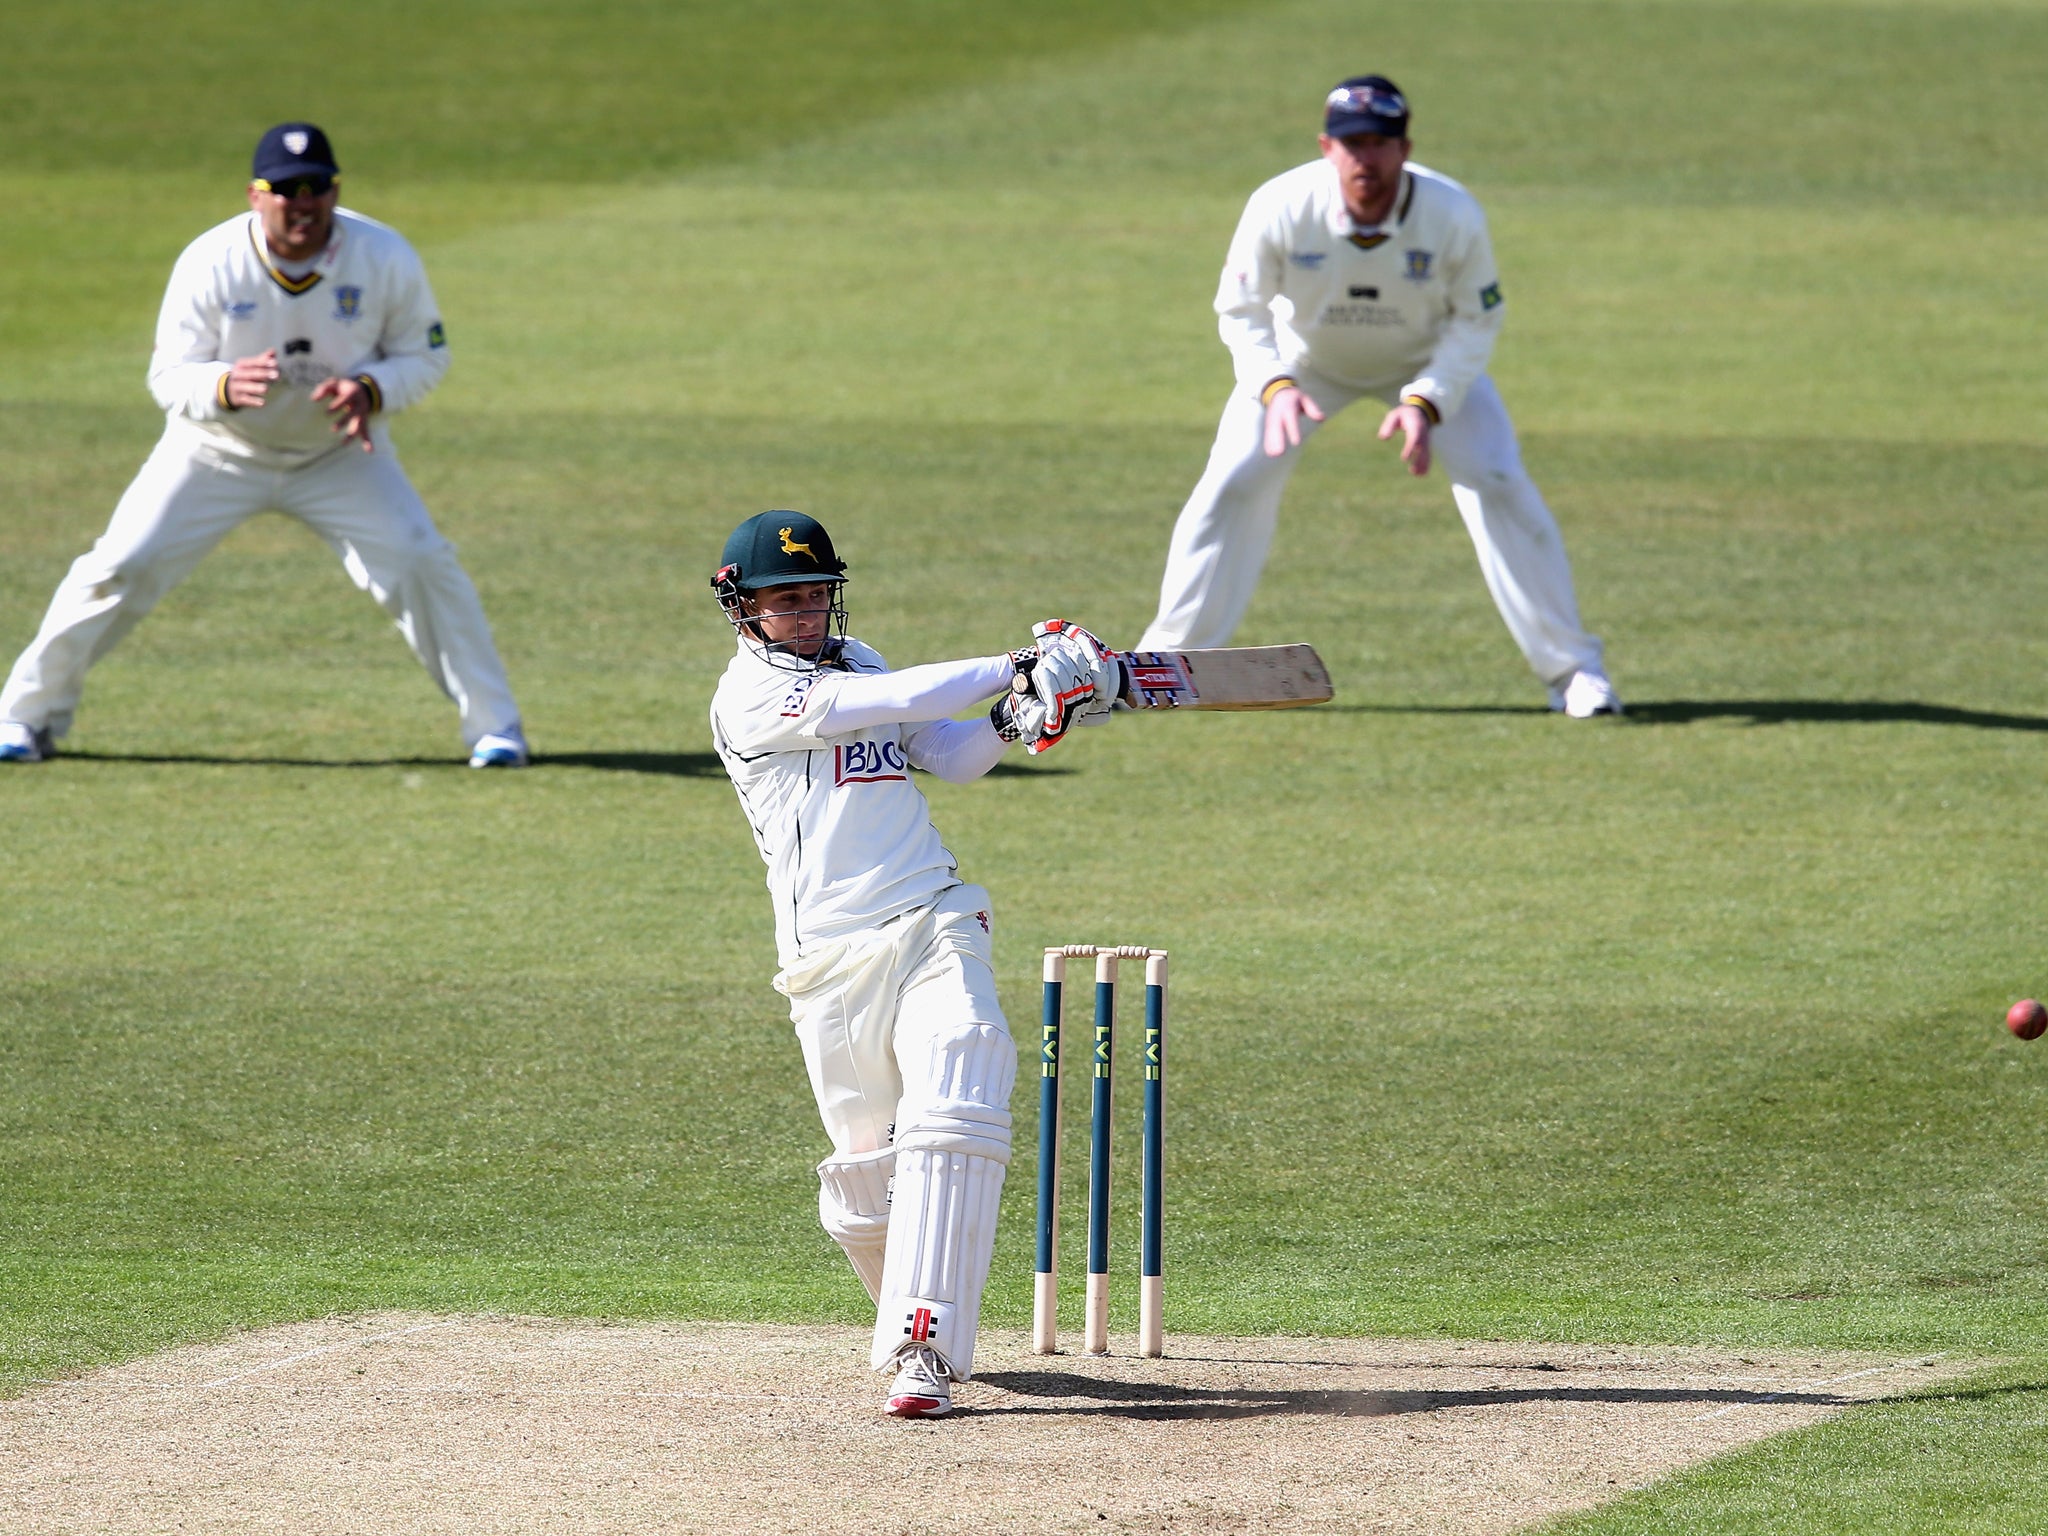 James Taylor missed out on back-to-back centuries